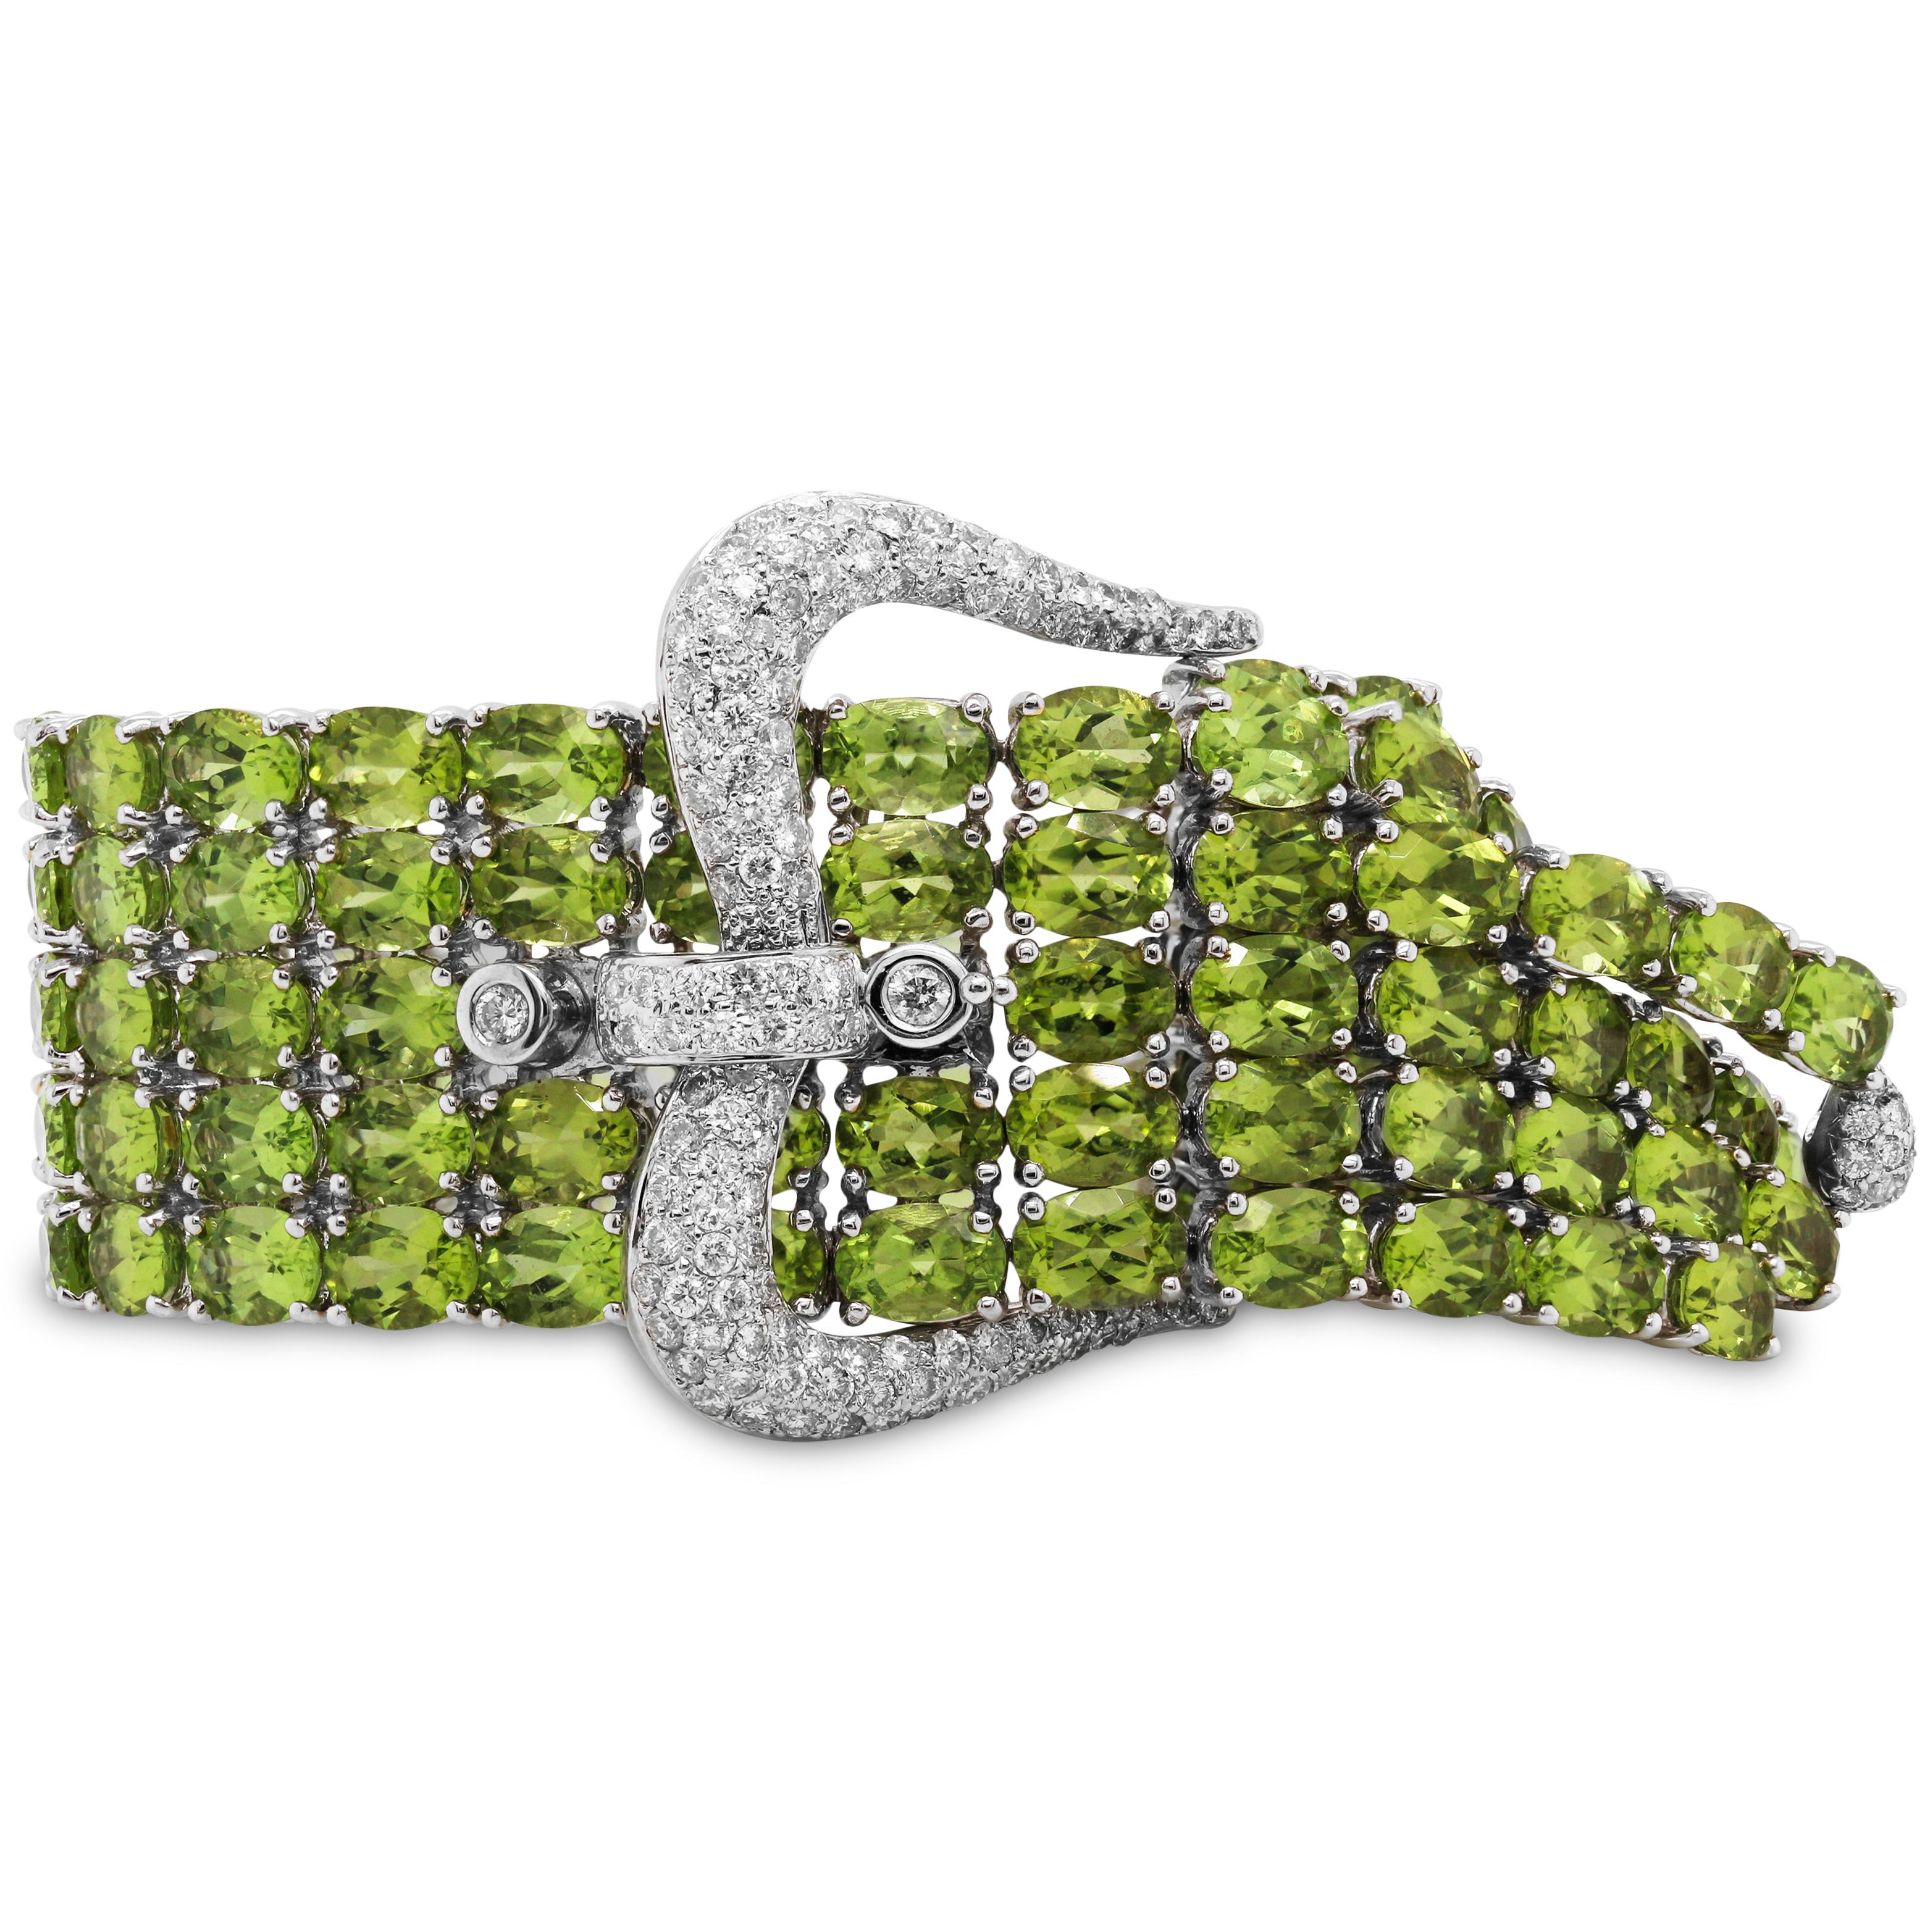 125 Carat Peridot 18K White Gold and Diamonds Buckle Style Five Row Bracelet

This state-of-the-art bracelet features apprx. 125 carats of Peridot. Each are oval cuts. Diamonds are set on the buckle itself along with on the opposite side in white